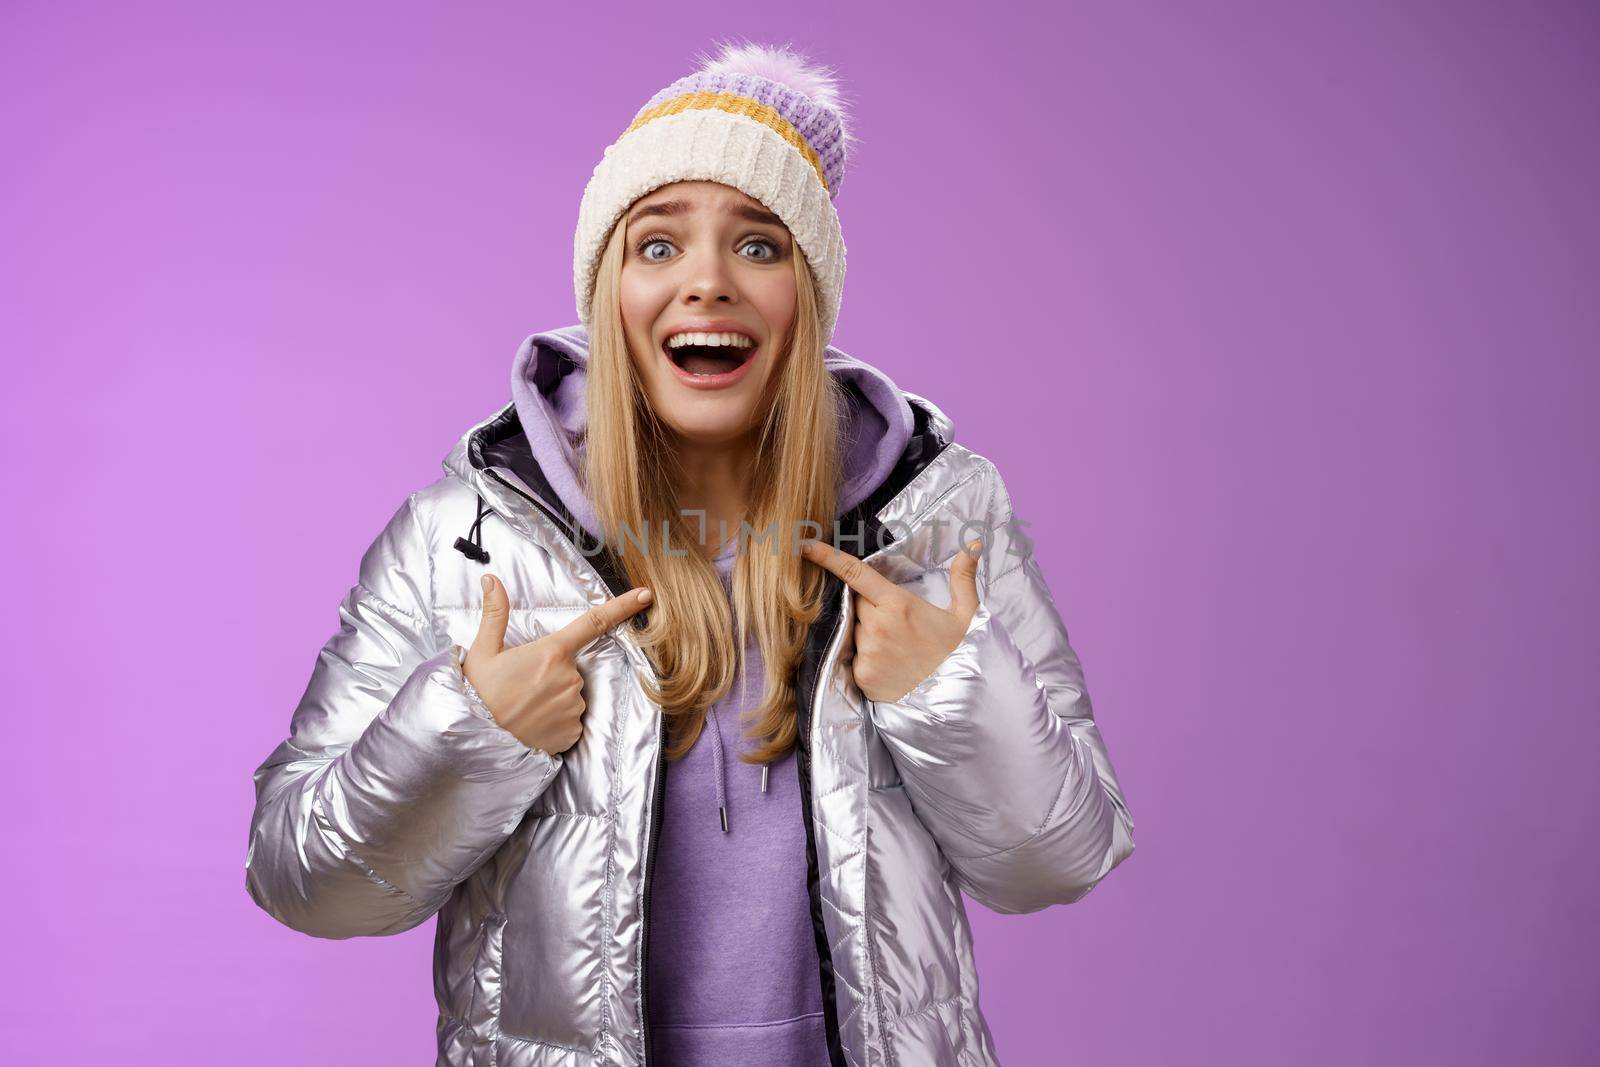 Surprised happy smiling joyful attractive woman pointing herself satisfied picked was chosen winner standing excited in silver shiny jacket winter hat cannot believe own luck, purple background.